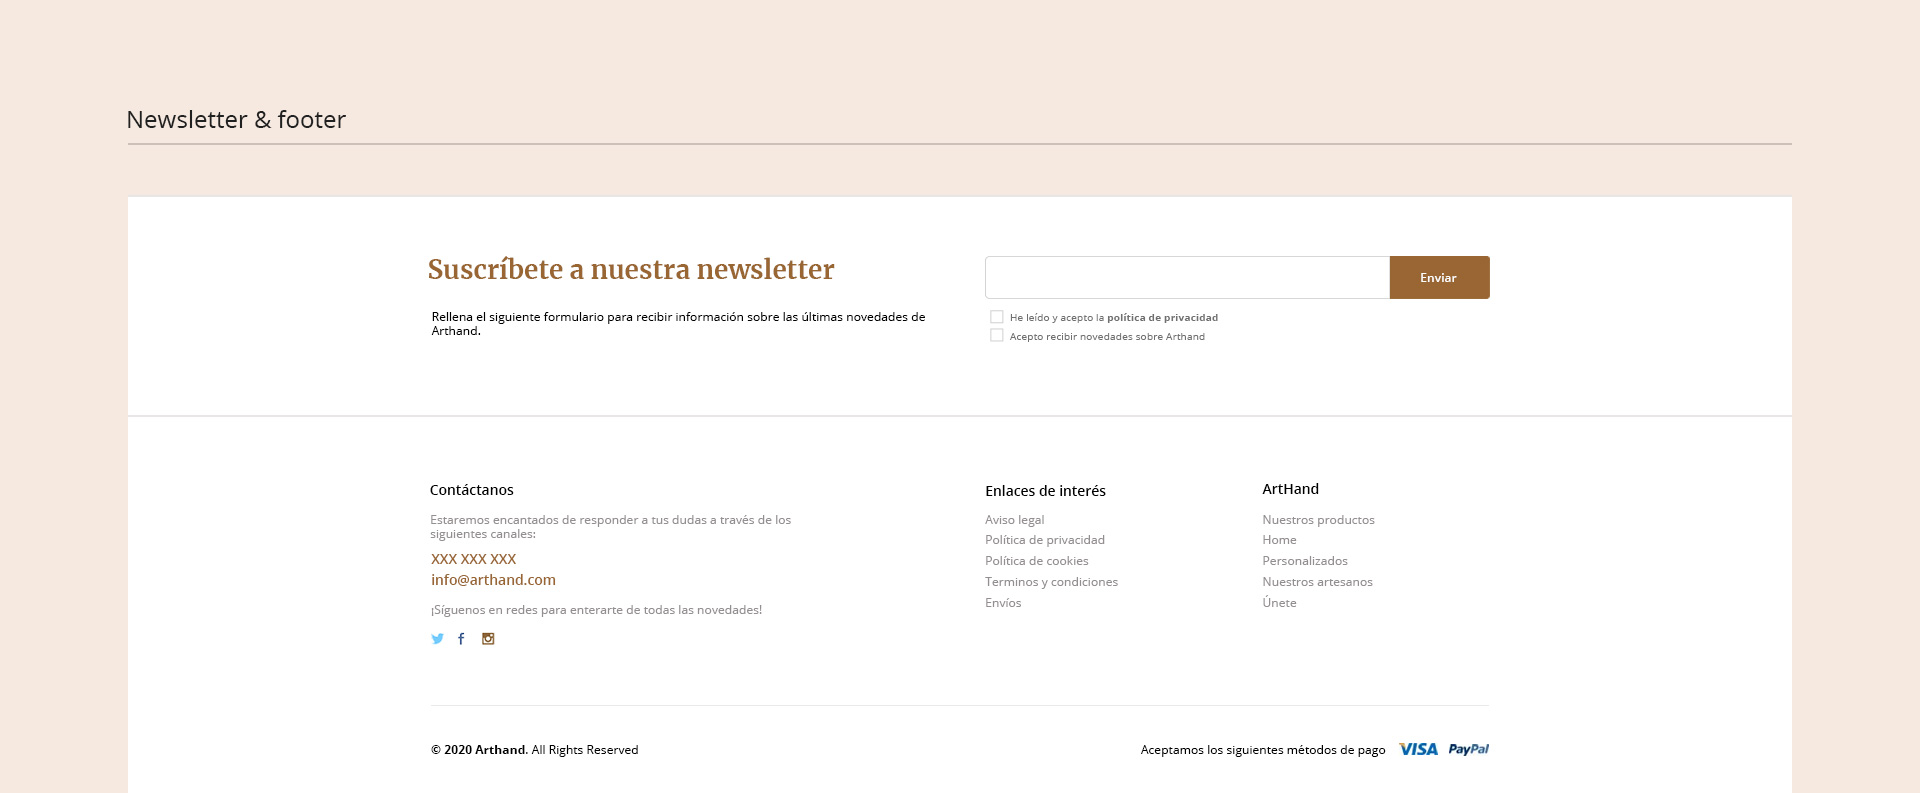 Newsletter and footer